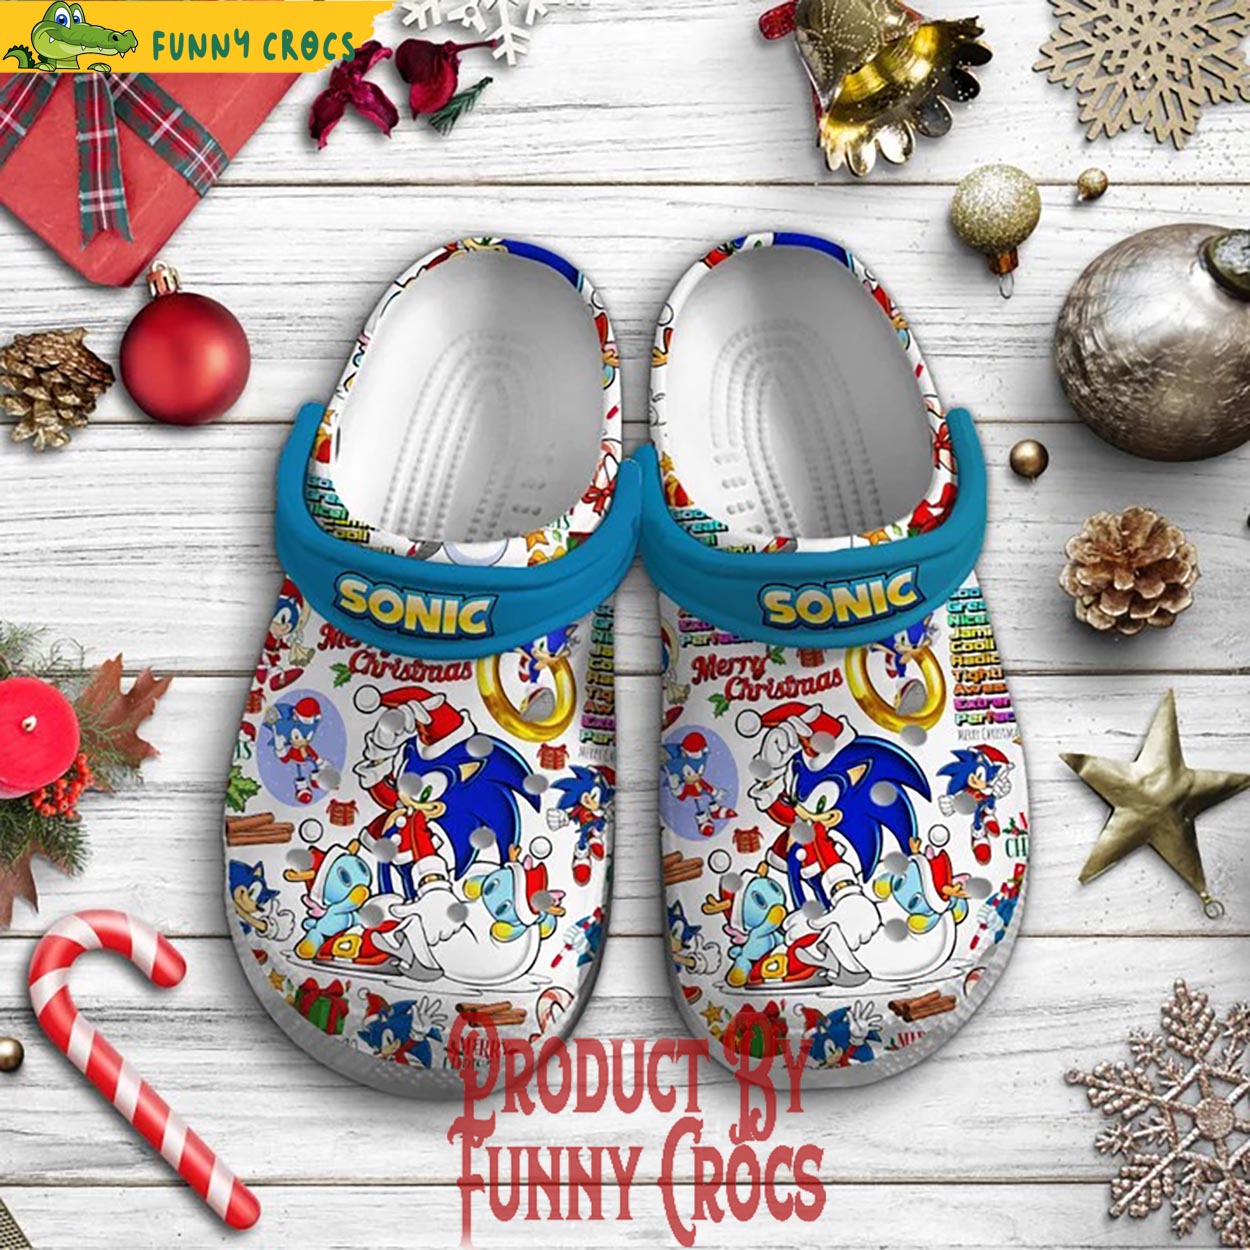 Merry Christmas Sonic Crocs - Discover Comfort And Style Clog Shoes ...